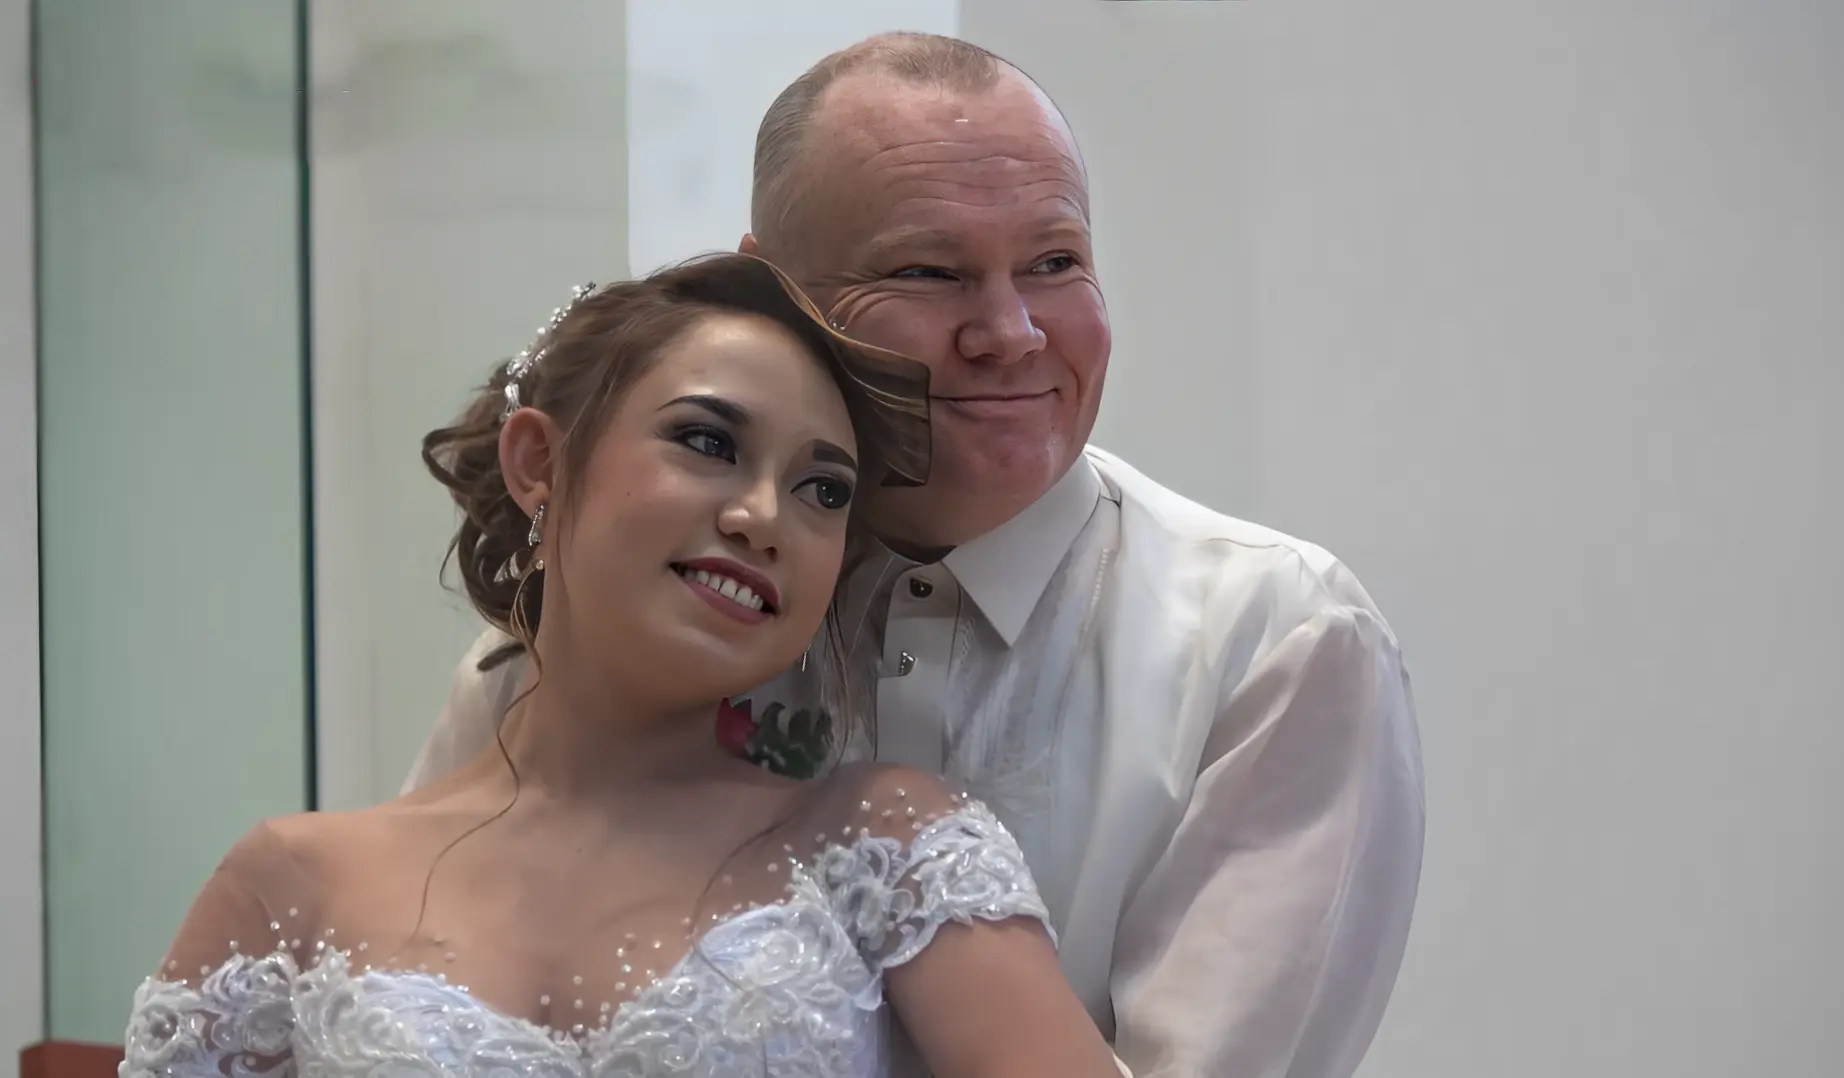 newly-wed couple is happily facing on the camera